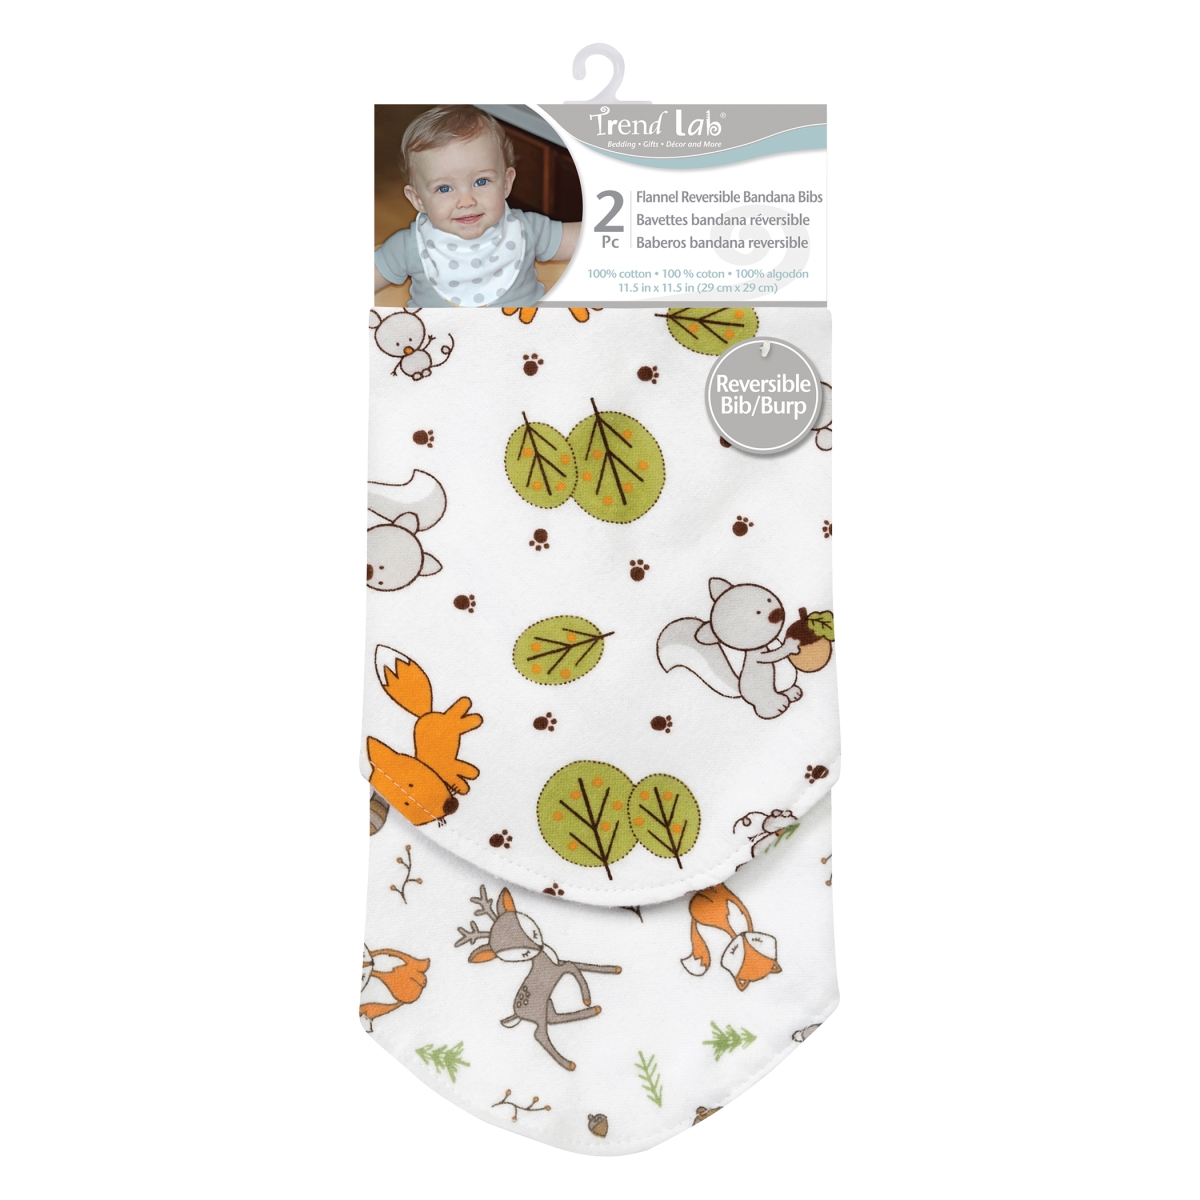 102977 11.5 X 11.5 In. Forest Bunch Reversible Flannel Bandana Bib Set - Pack Of 2